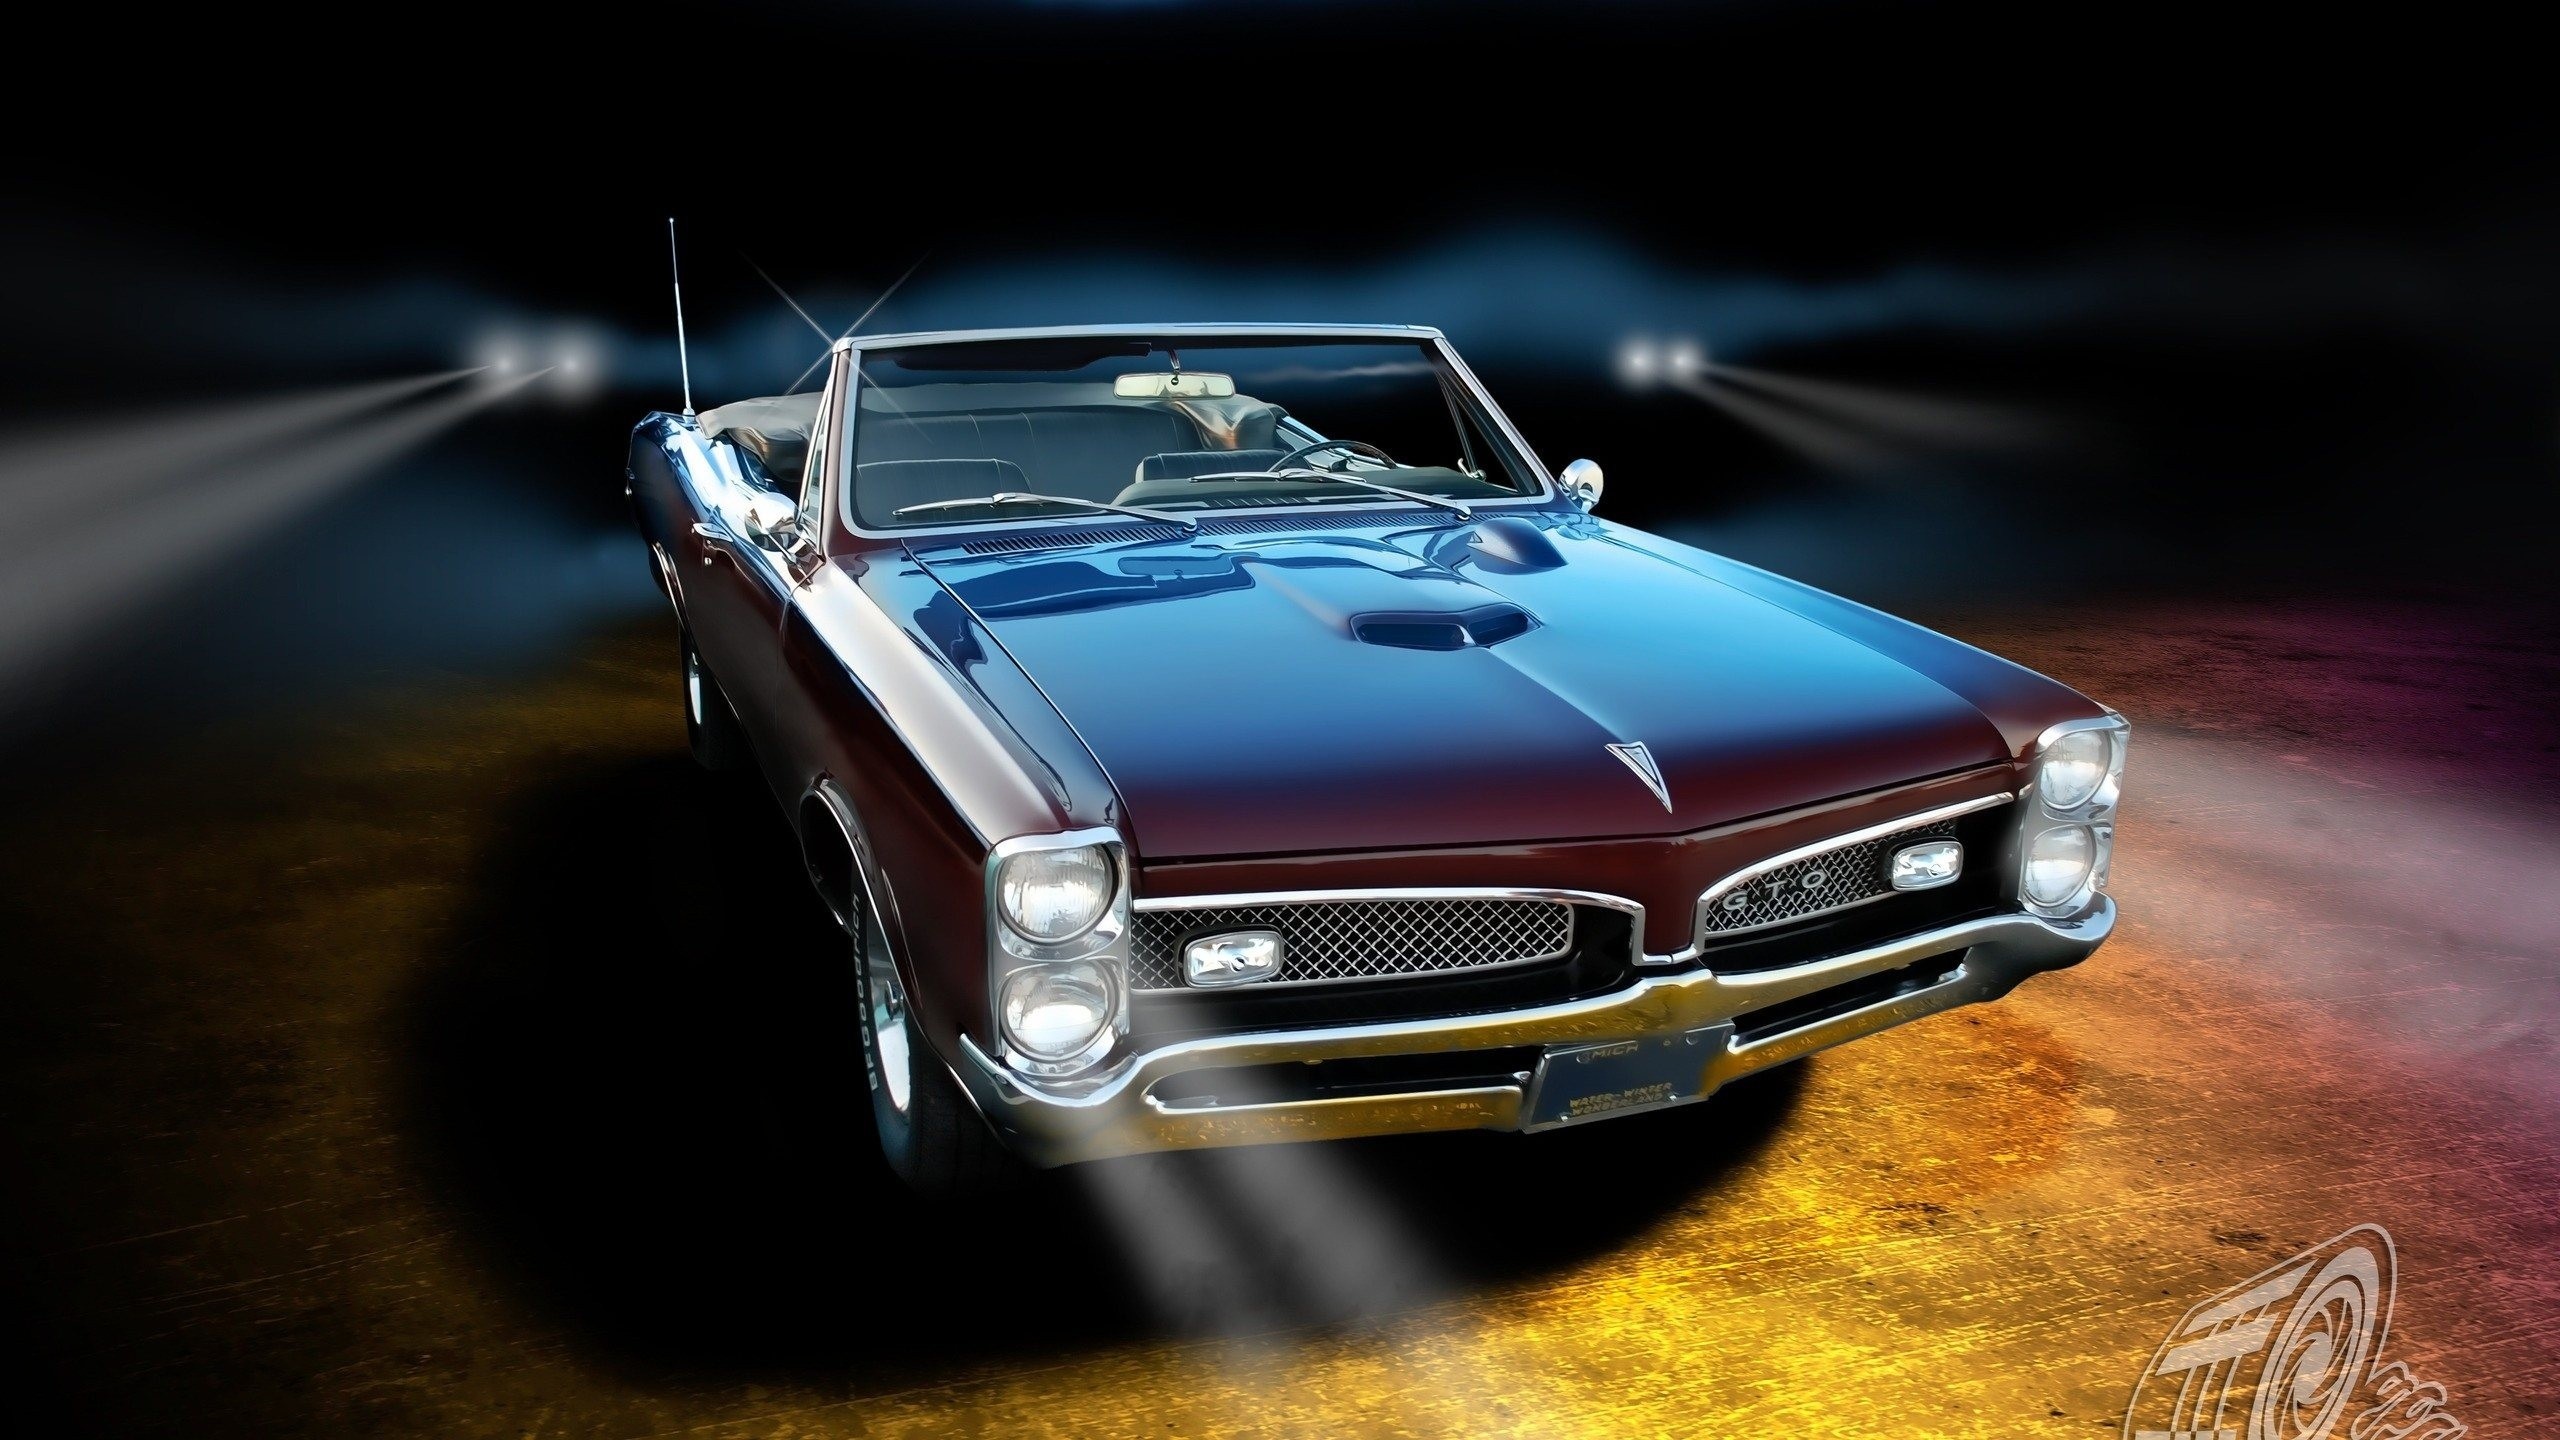 2560x1440 Pontiac Gto Cars And Classic Muscle Cars On Pinterest. american muscle cars  wallpaper